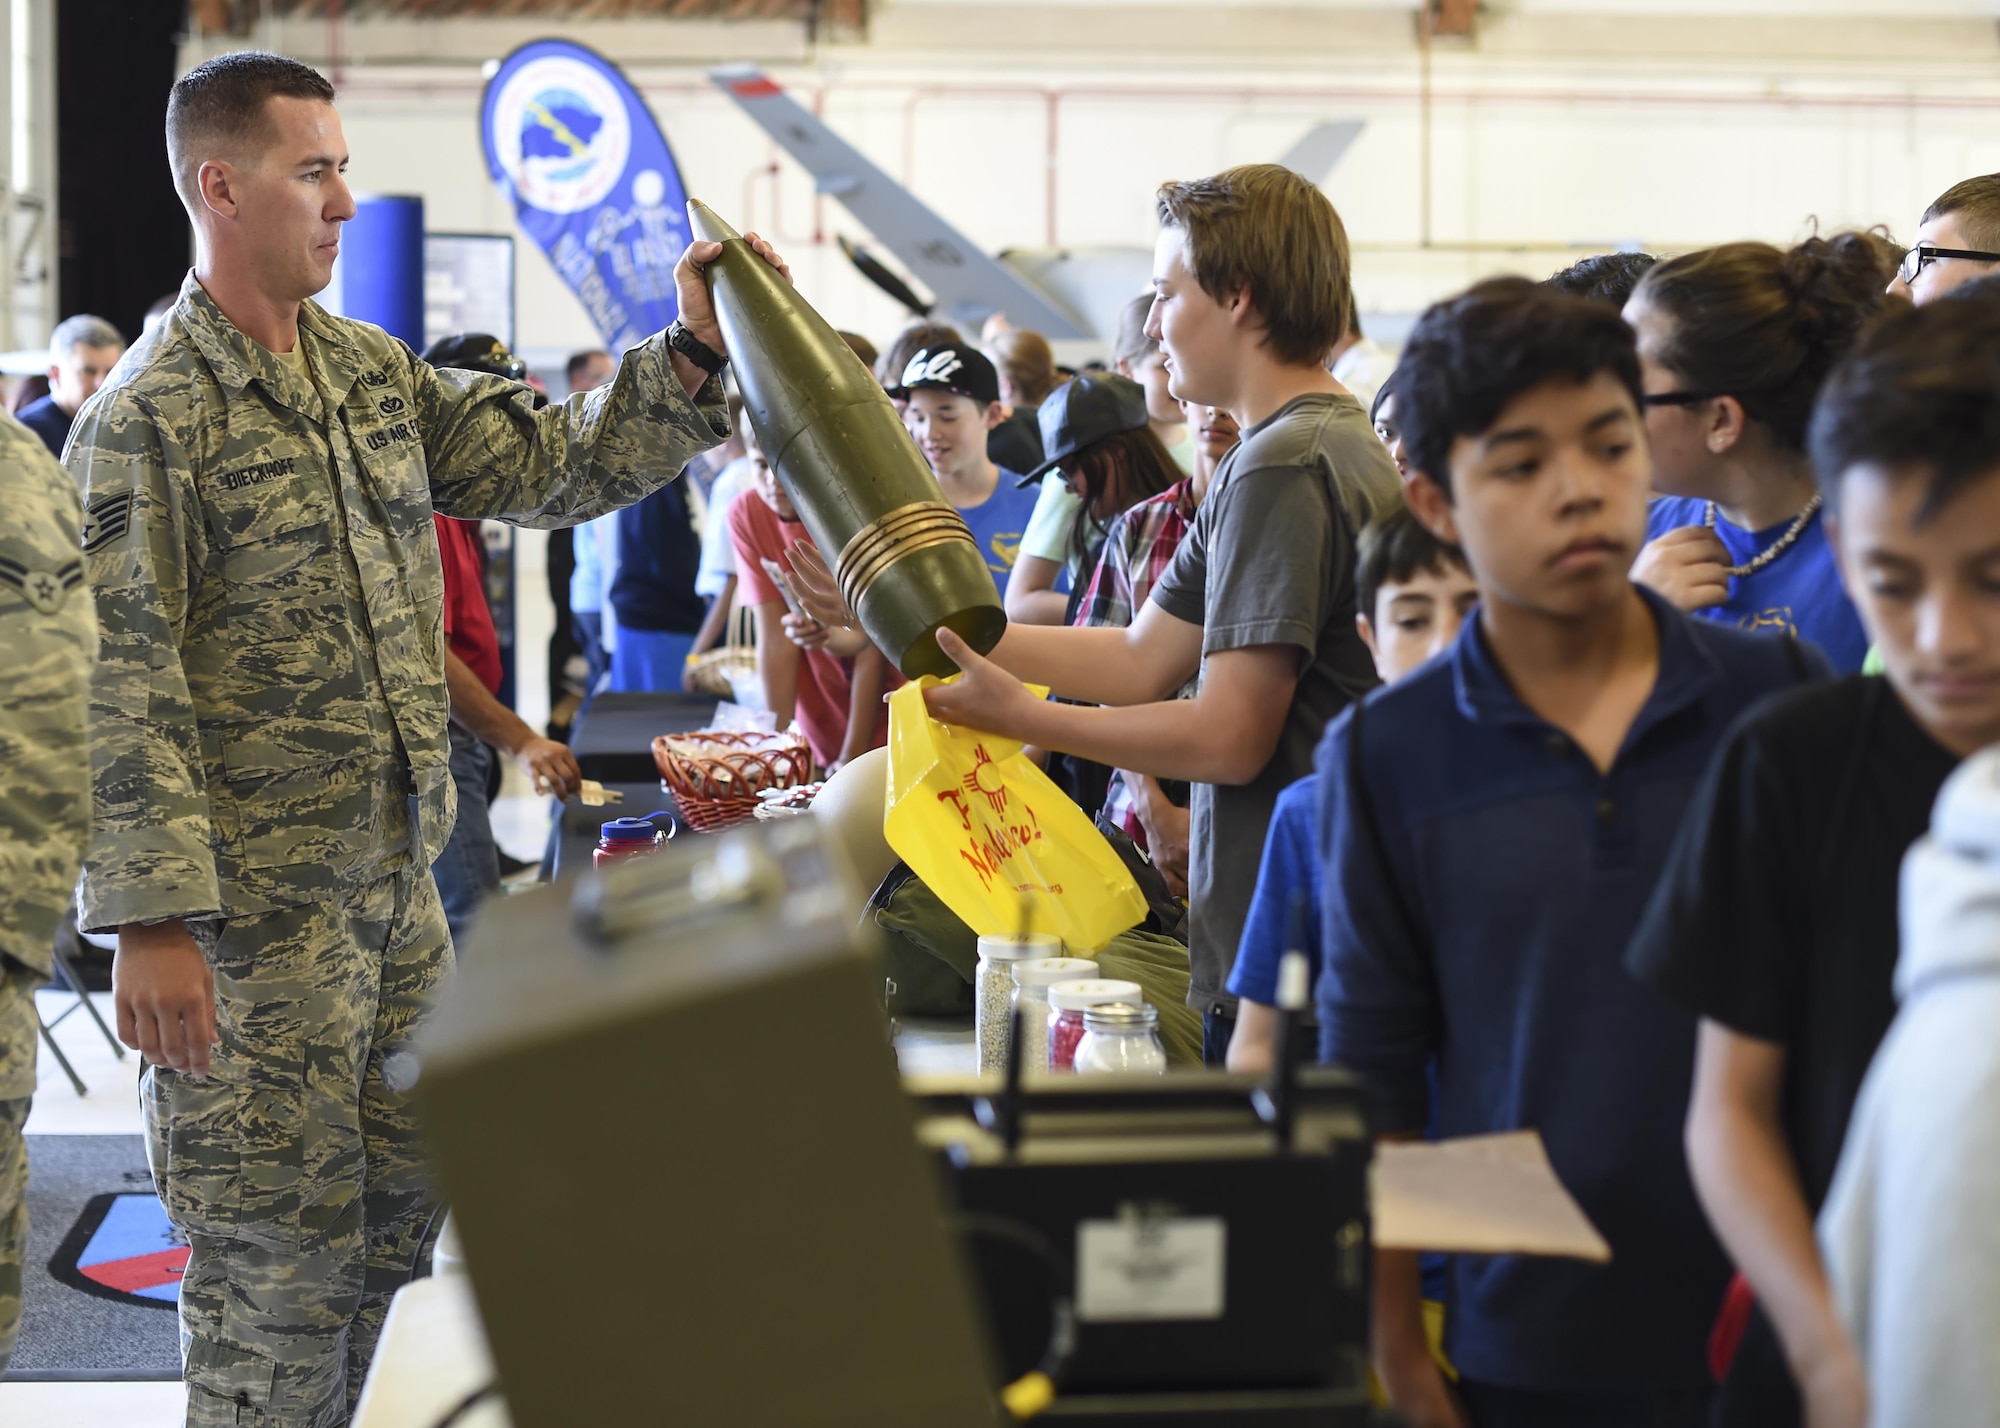 Staff Sgt. Evan Dieckhoff, Explosive Ordnance Disposal technician with 49th Civil Engineer squadron hands a a plastic training aid a mock-up of an artillery projectile to a student during the fourth annual New Mexico Aviation Aerospace Association Career Expo Oct. 6, 2016 at Holloman Air Force Base N.M. About 2,500 middle school through college-level students from across New Mexico came out to learn about the science, technology, engineering and mathematics fields. The goal of STEM is to motivate and educate students by giving them a taste of what aviation and aerospace engineering is all about. These STEM events also get the students talking to people who are working directly in STEM industries.  (U.S. Air Force photo by Staff Sgt. Stacy Jonsgaard)